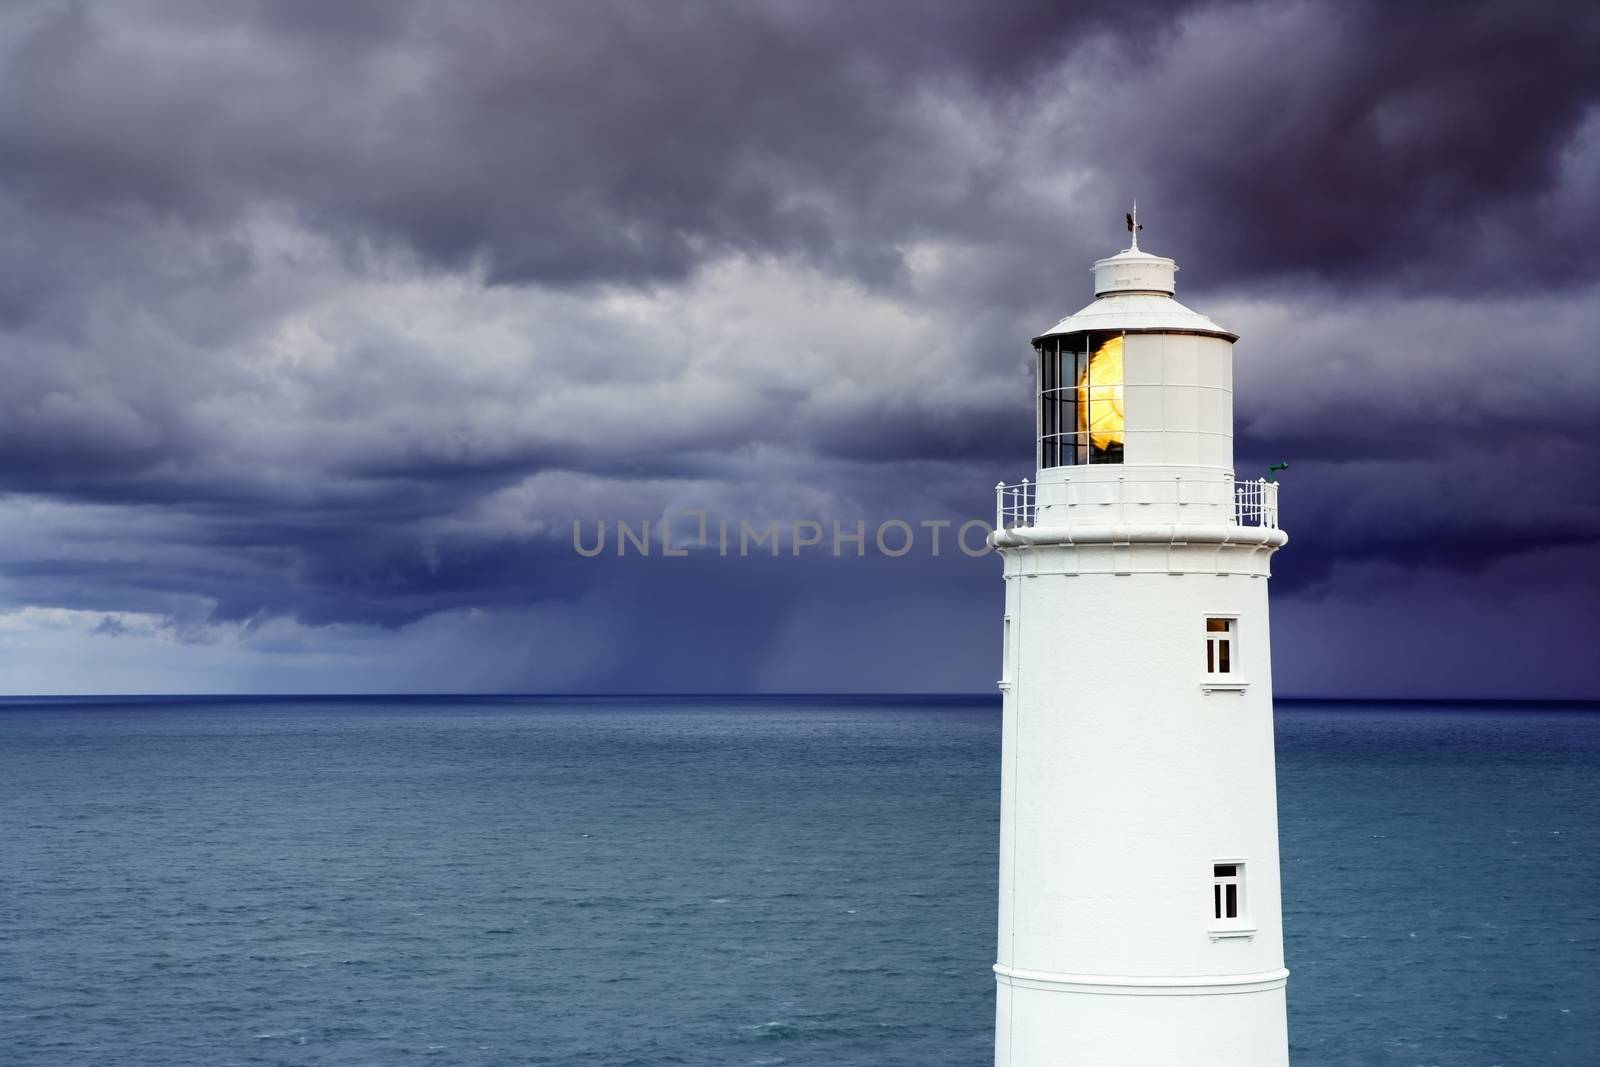 Lighthouse against stormy sky by conceptualmotion